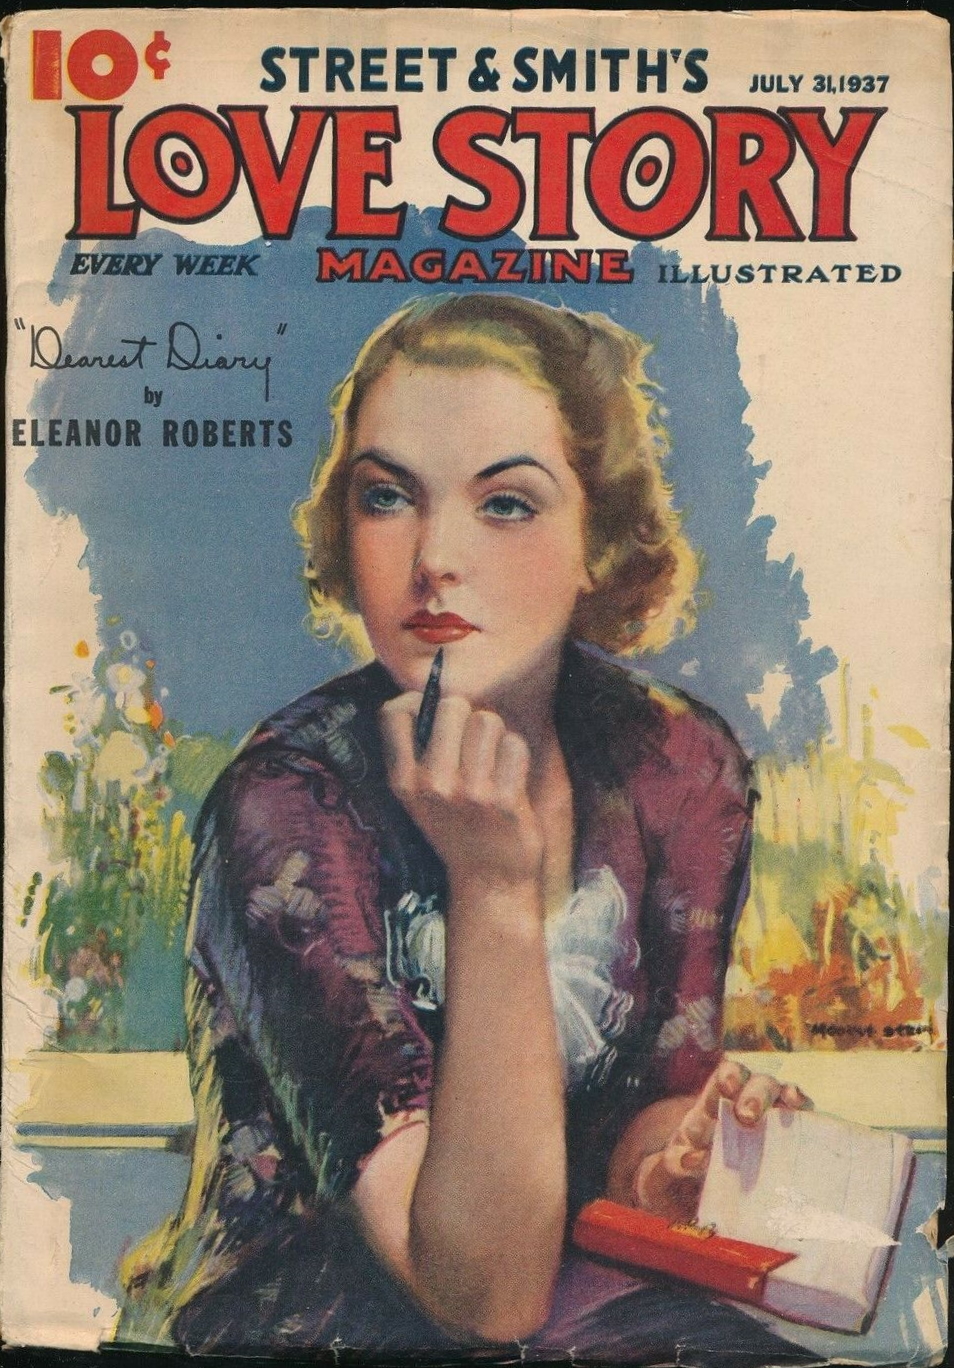 Street and Smith's Love Story Magazine - July 21 1937